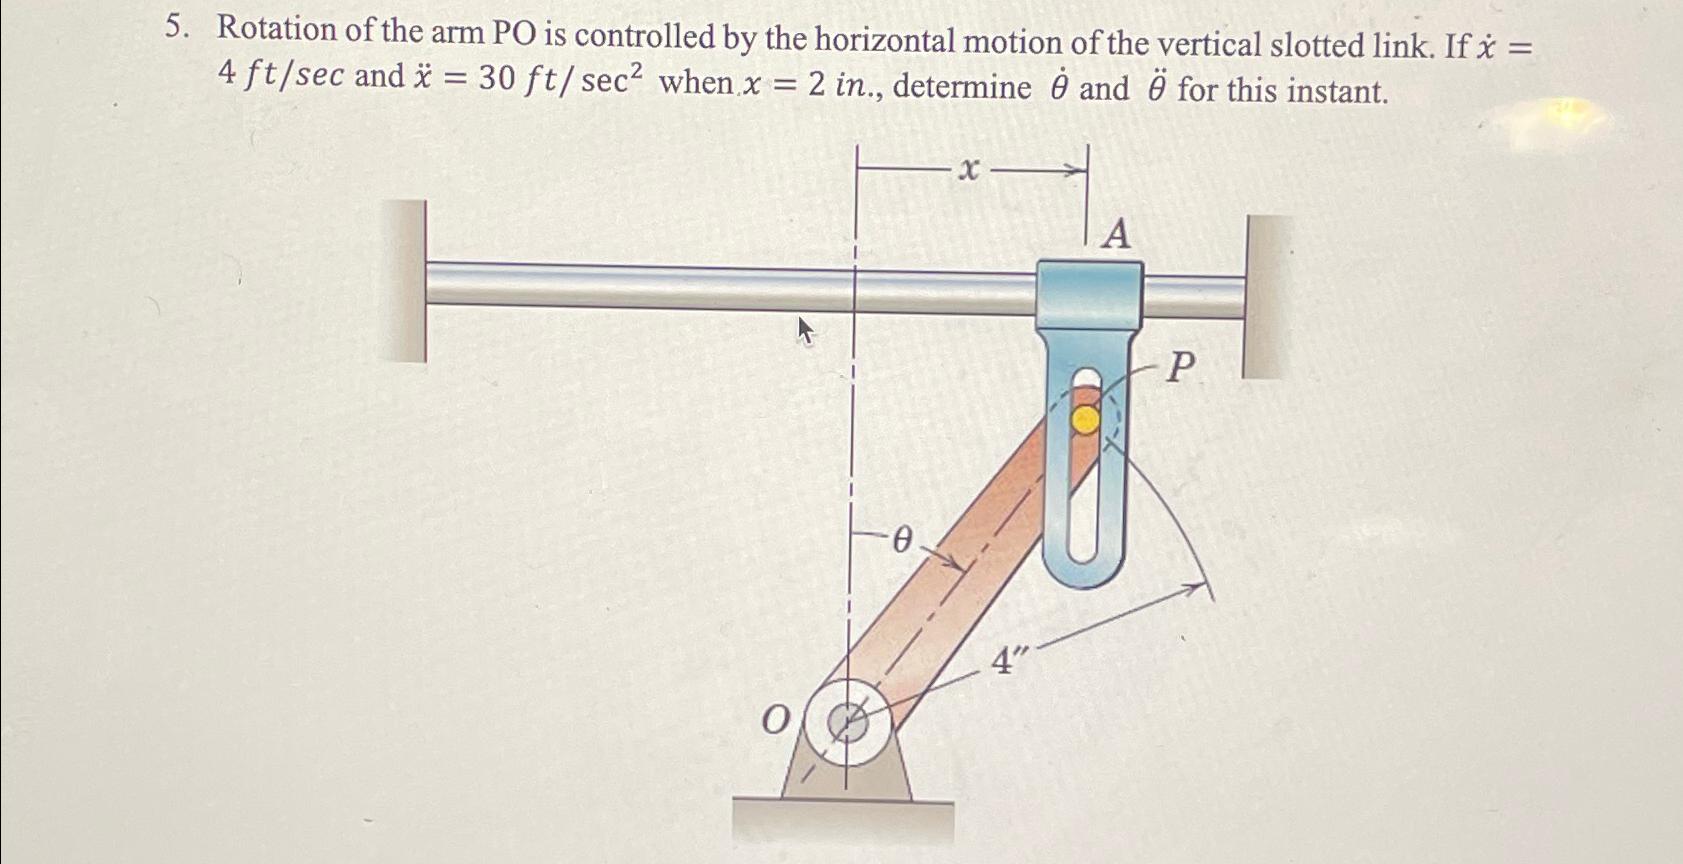 5. Rotation of the arm PO is controlled by the horizontal motion of the vertical slotted link. If x = 4